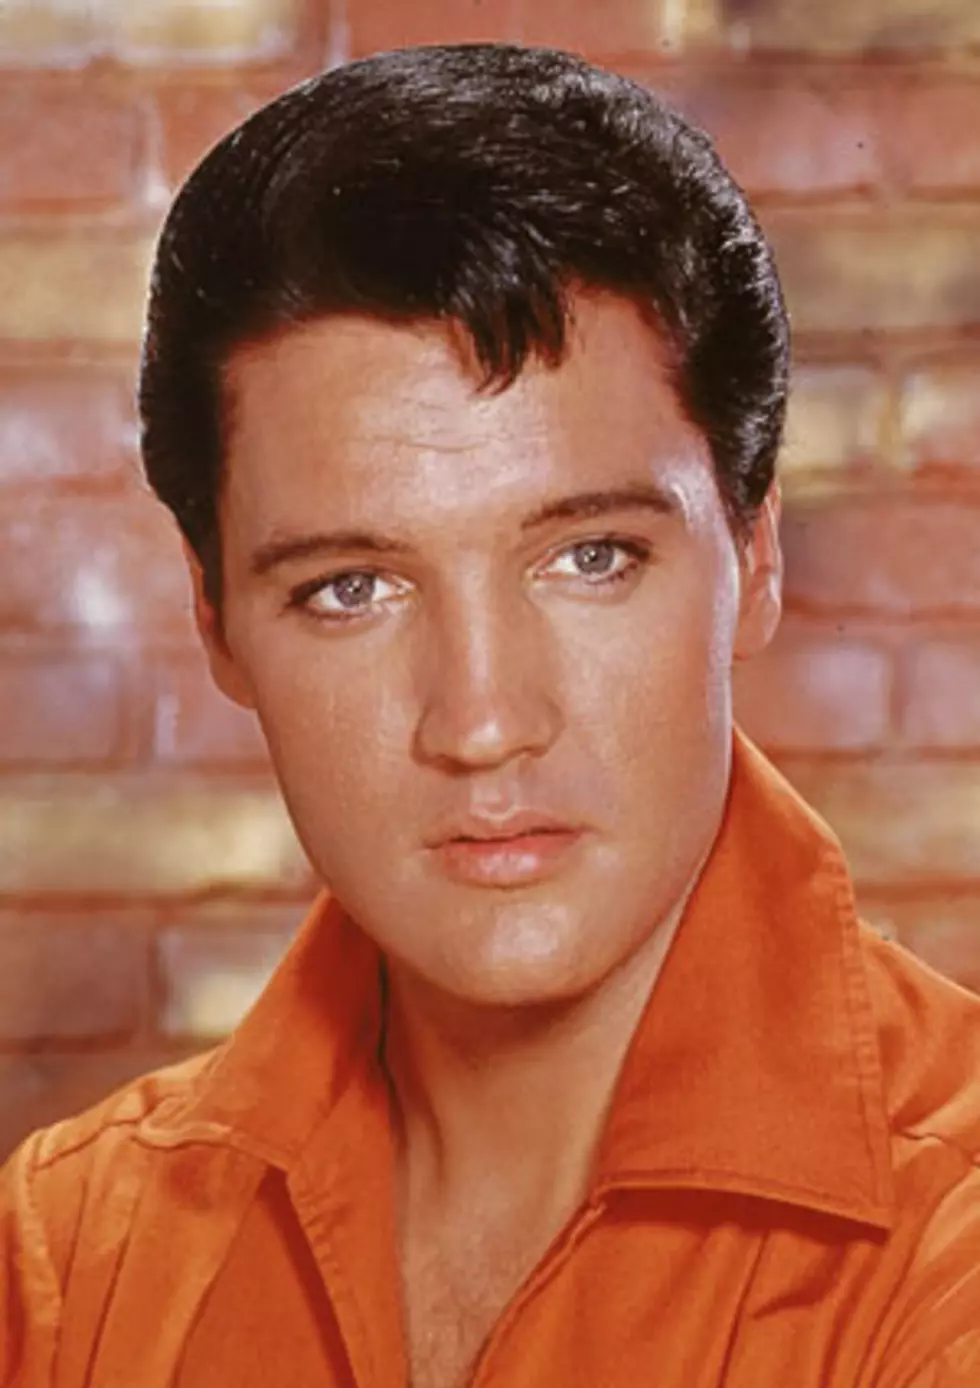 Nashville Resident May Have Found Rare Elvis Presley and Jerry Lee Lewis Recording